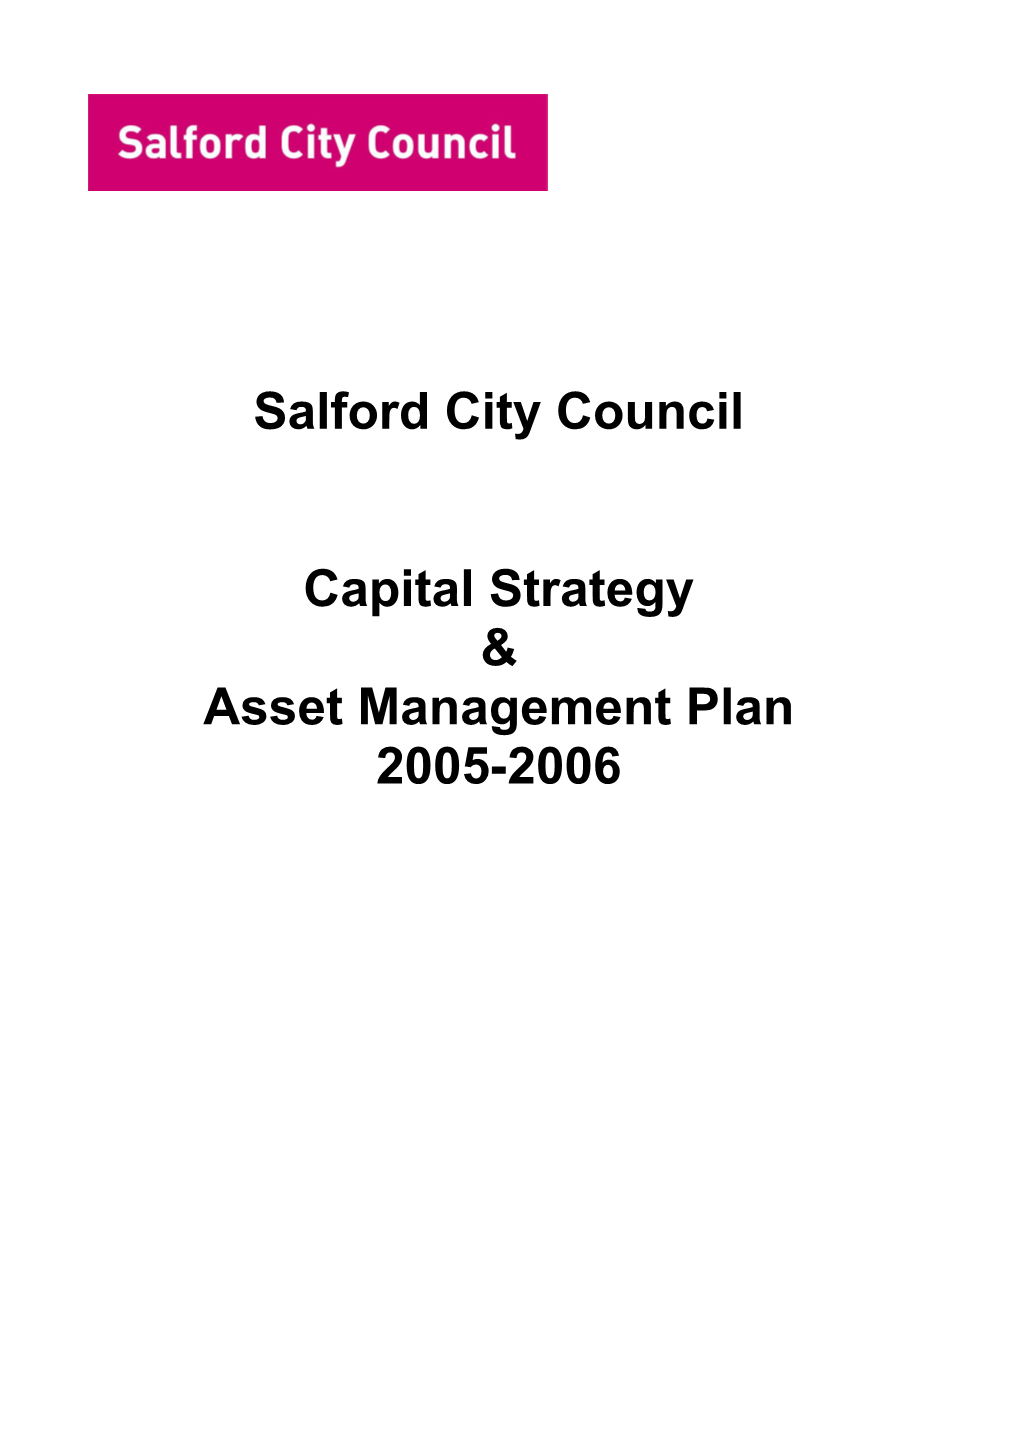 Salford City Council s2